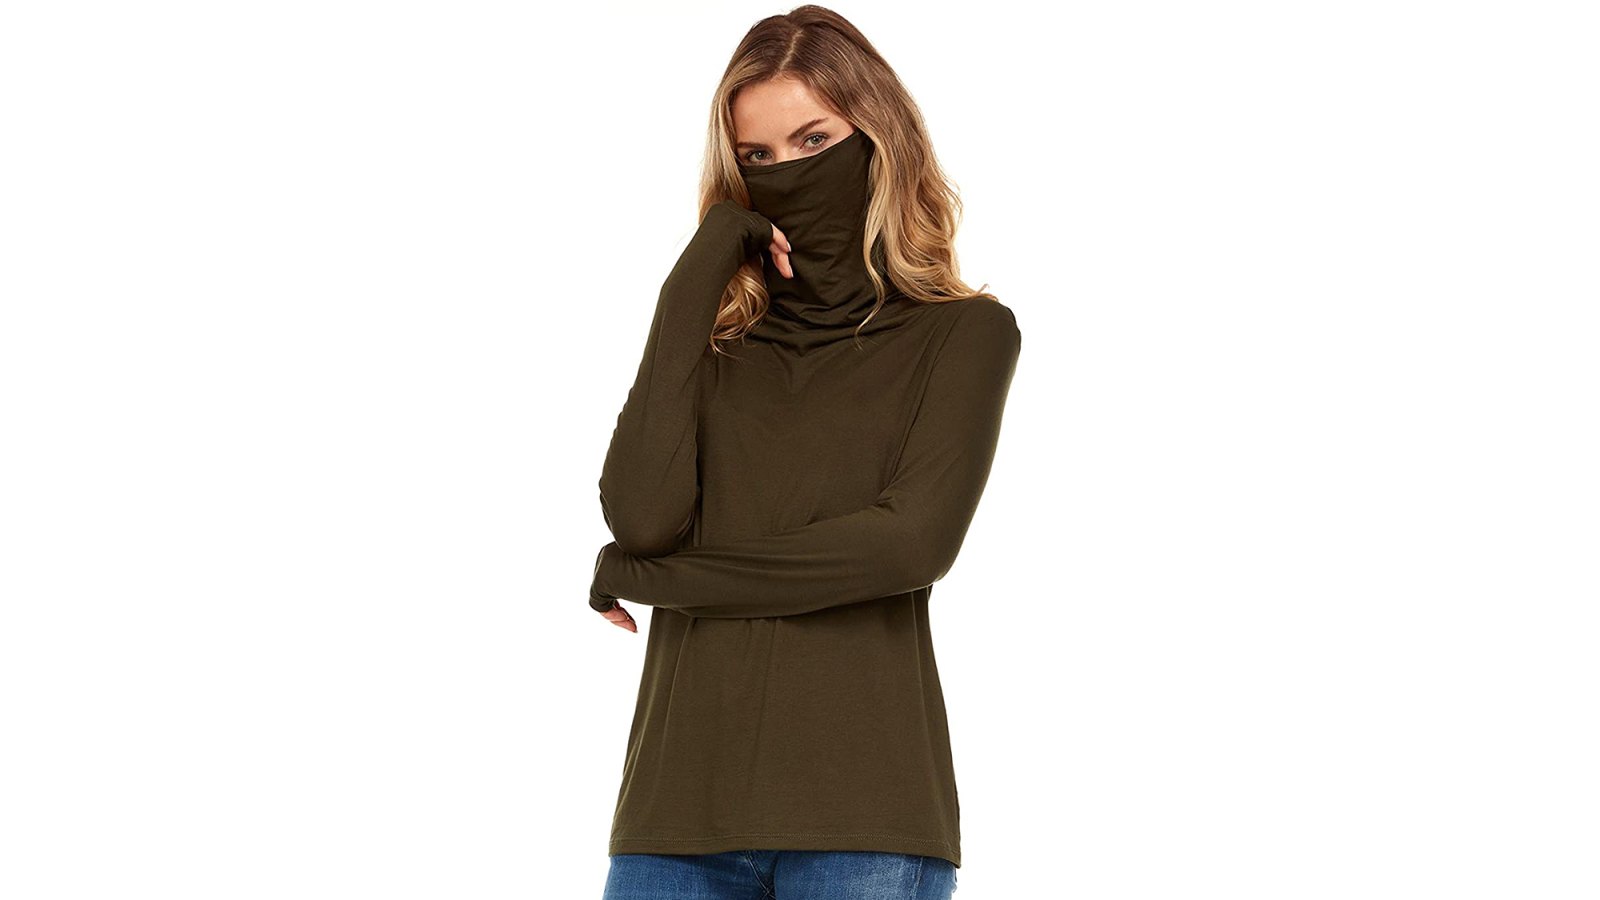 Inner Beauty Womens Long Sleeve Shirt with Attached Face Mask